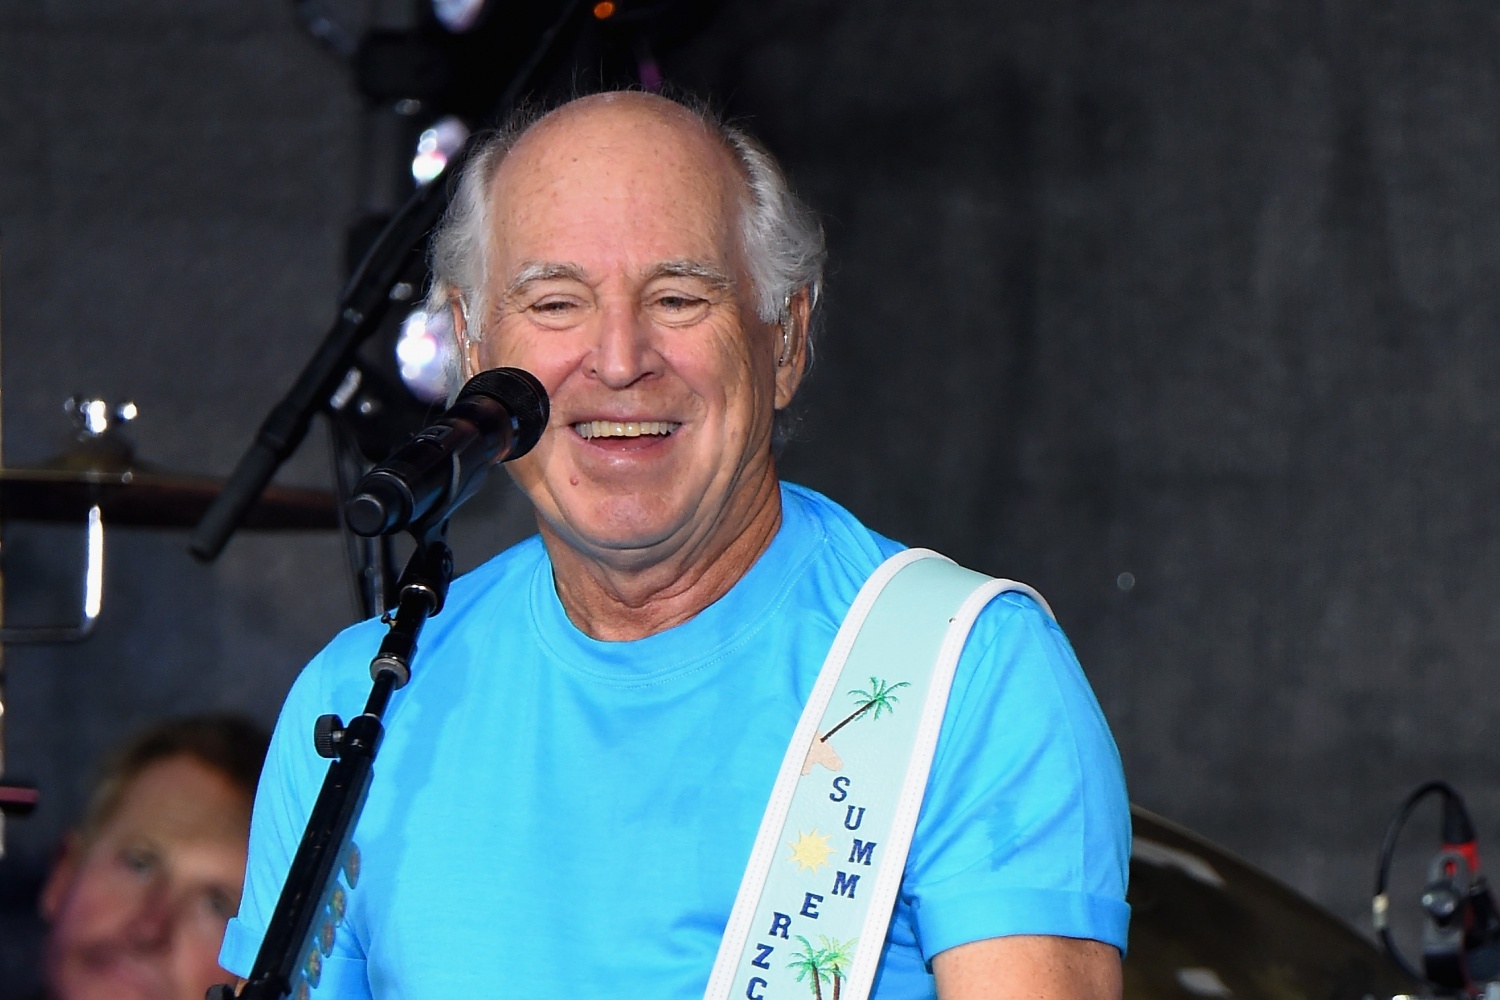 Jimmy Buffett's Cause of Death Is F----- Up, Howard Stern Mourns After Singer's Death